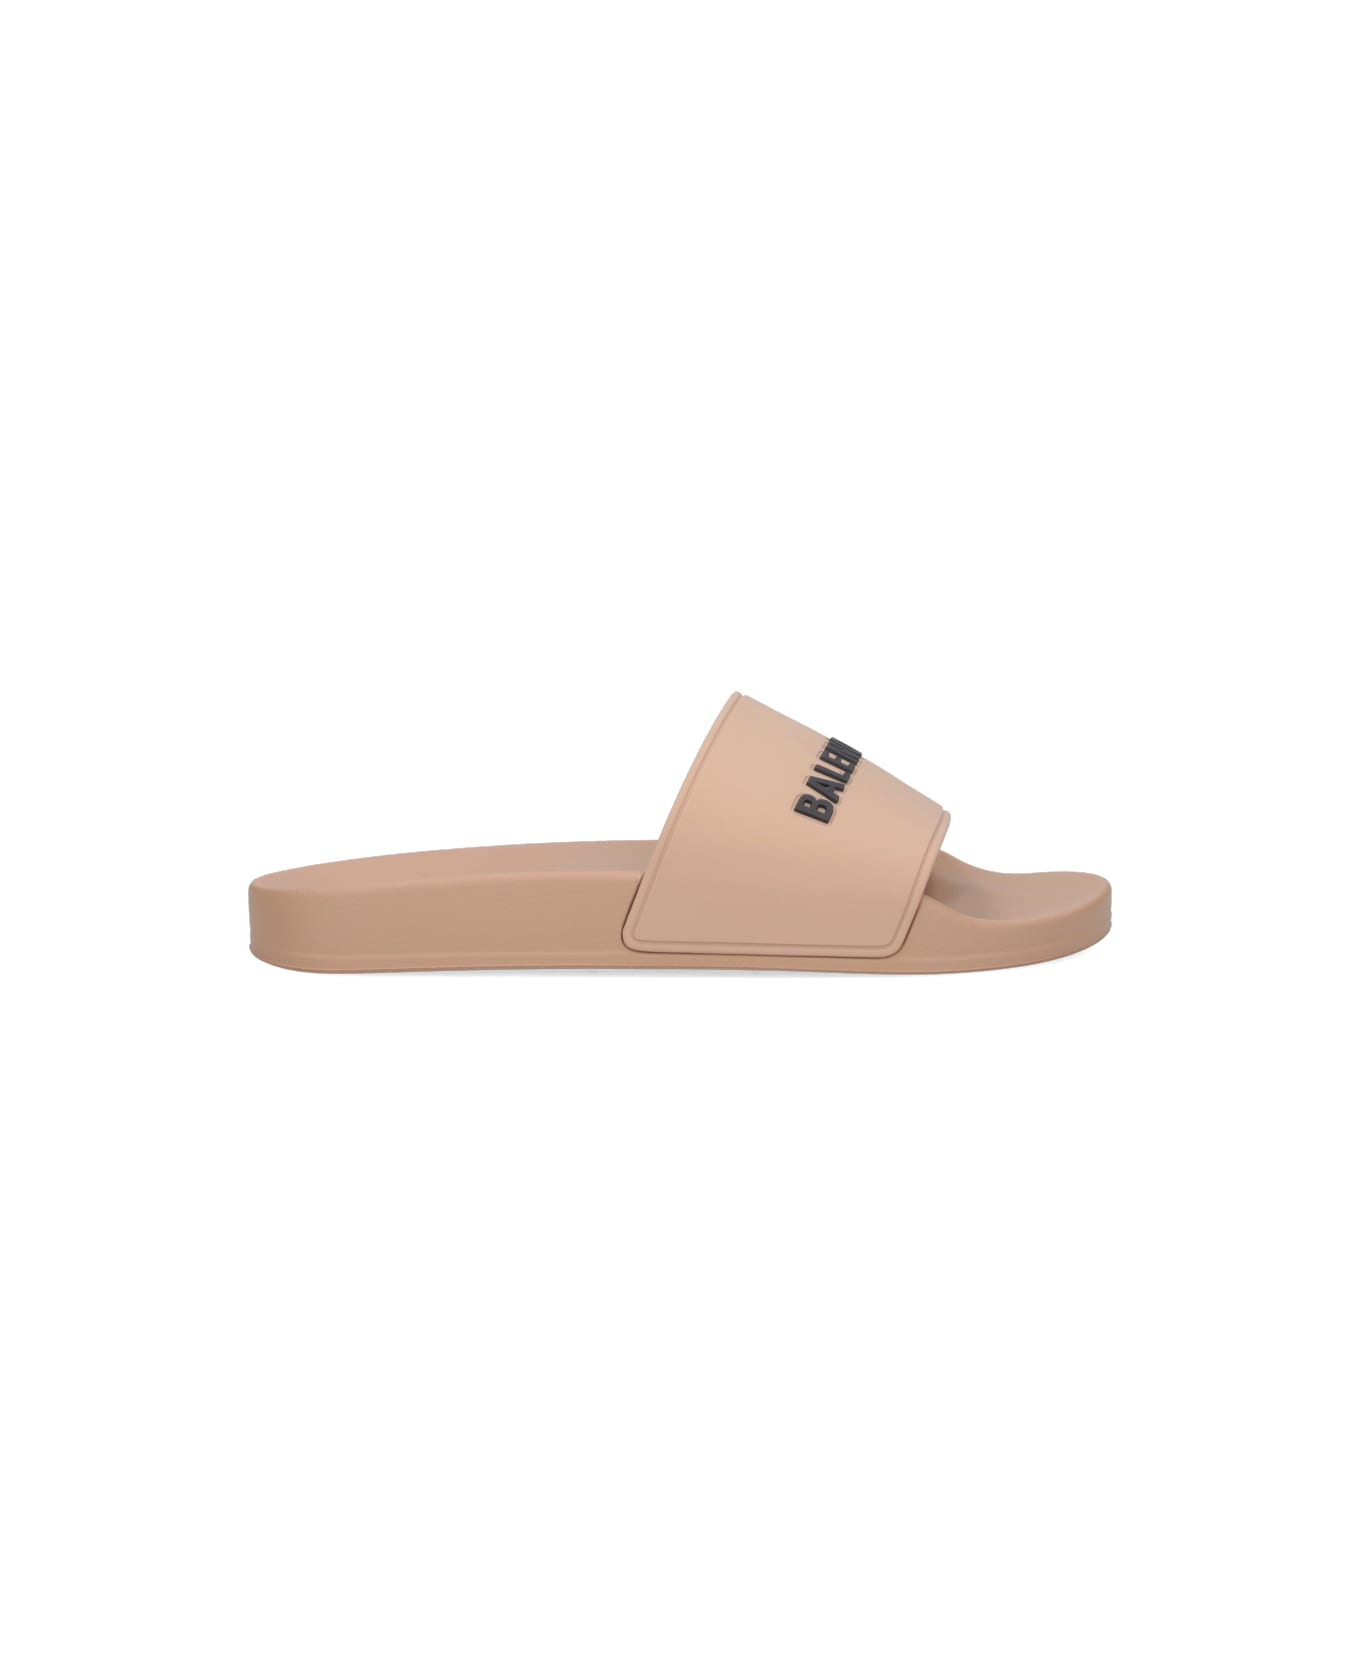 Balenciaga Slide Sandals With Logo In Rubber Man - Nude & Neutrals その他各種シューズ